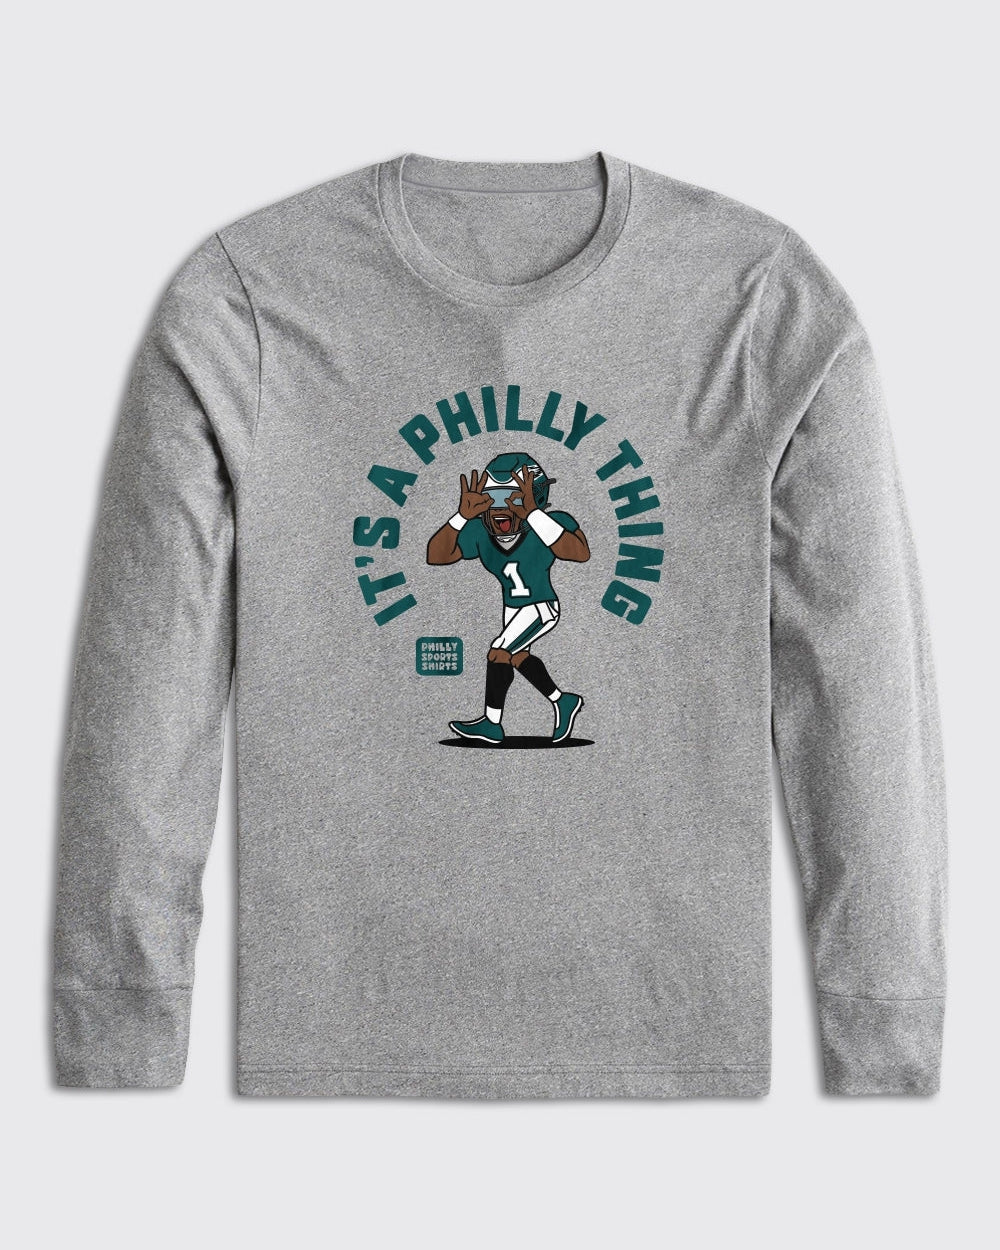 Philadelphia Eagles-It's A Philly Thing Long Sleeve-Athletic Heather-Philly Sports Shirts